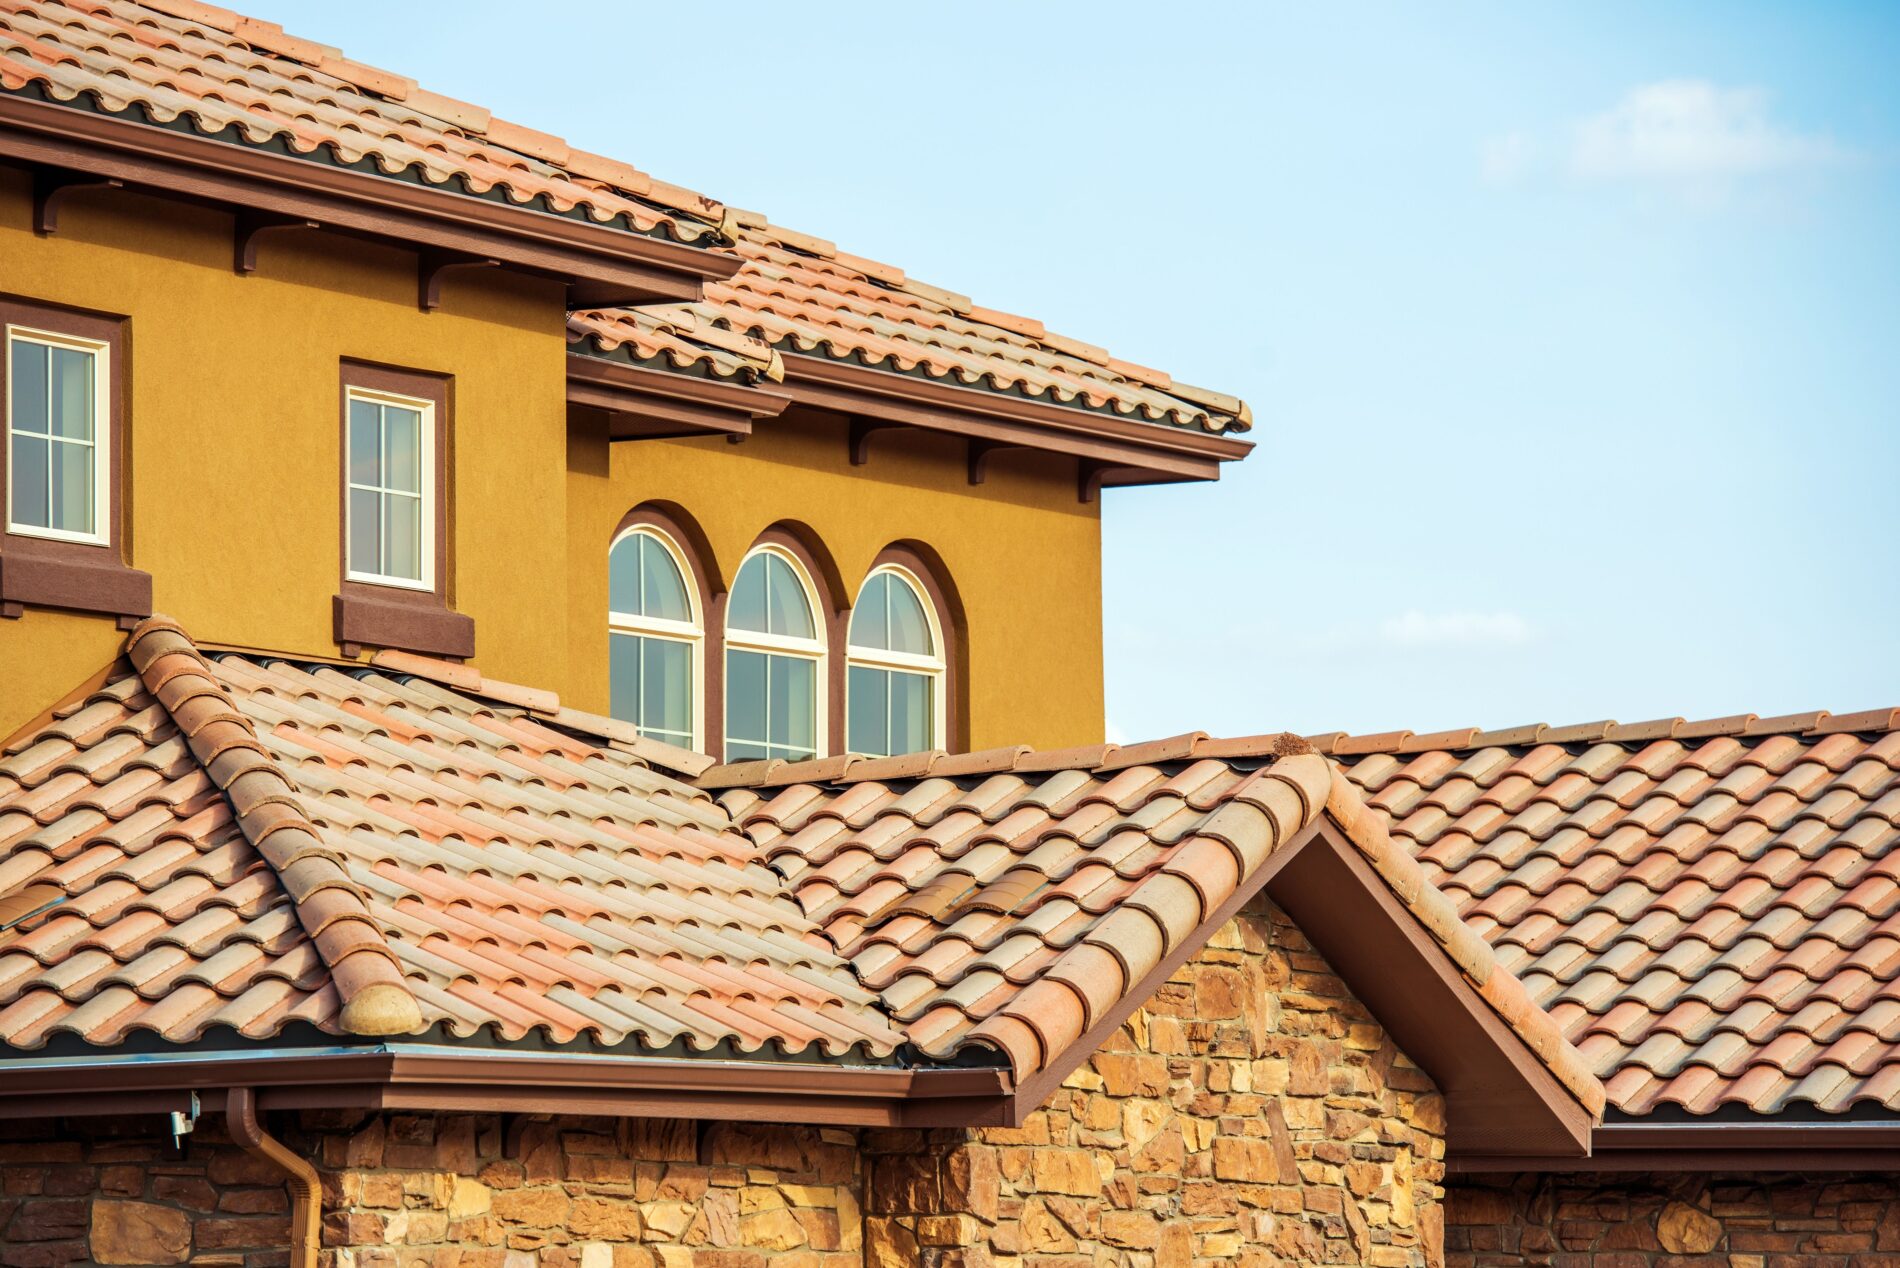 Slate Roofing Services In Garland Tx Adds Value To Your Property 